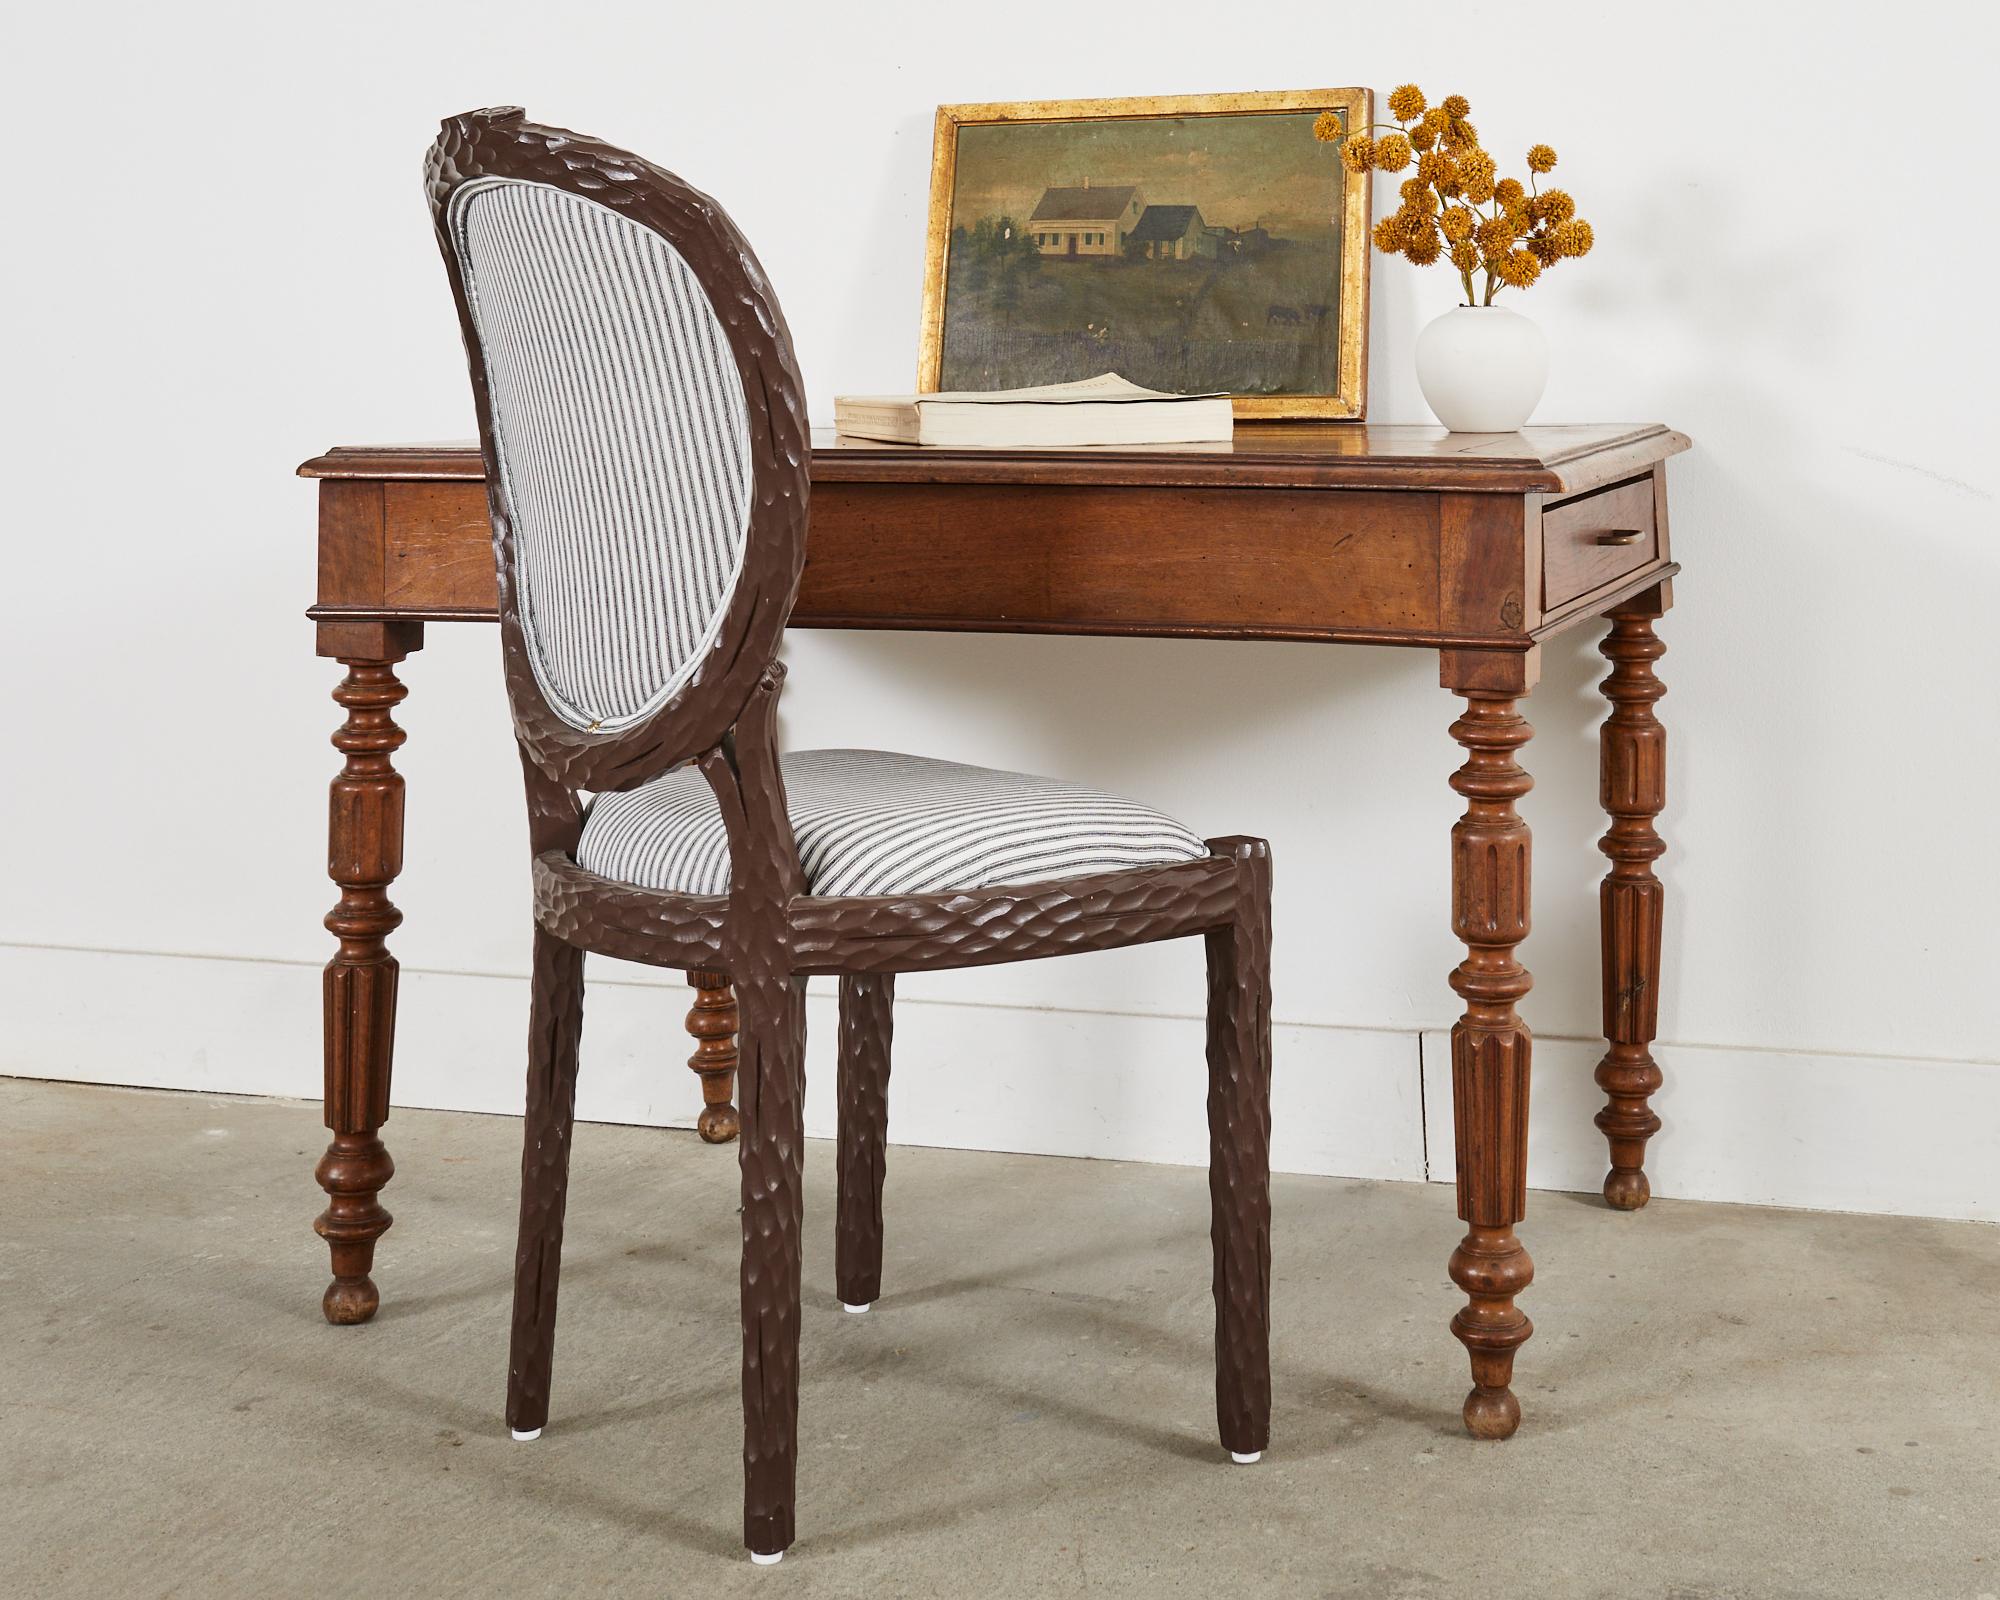 Handsome 19th century English William IV writing table or desk crafted from mixed fruitwood and oak. The table has storage drawers on each end with patinated brass pulls. The top has a decorative ogee edge on the border. The desk features whimsical